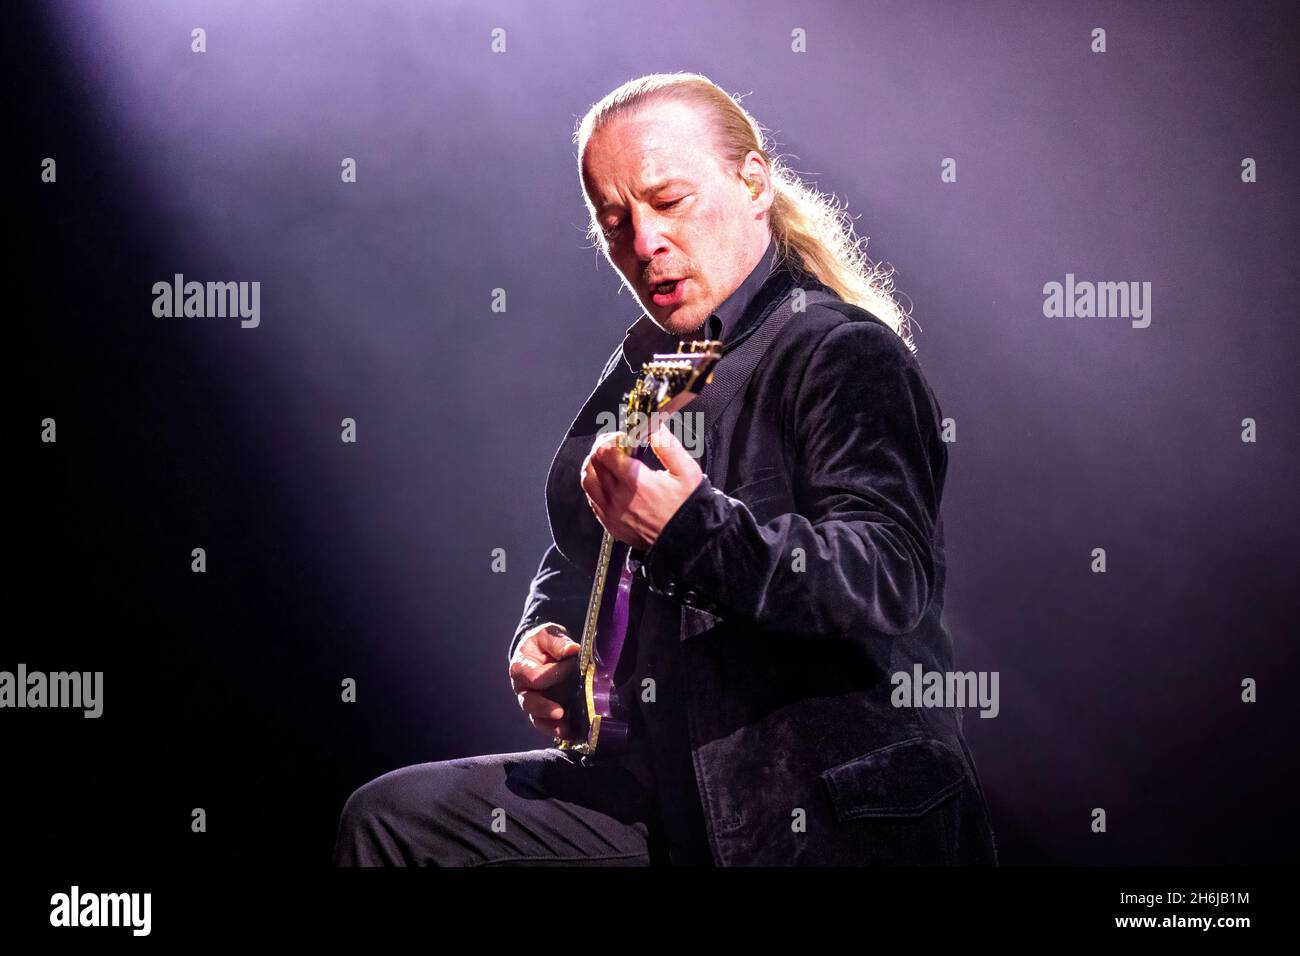 Oslo, Norway. 14th, November 2021. Nightwish, the Finnish symphonic metal band, performs a live concert at Oslo Spektrum in Oslo. Here guitarist Emppu Vuorinen is seen live on stage. (Photo credit: Gonzales Photo - Terje Dokken). Stock Photo